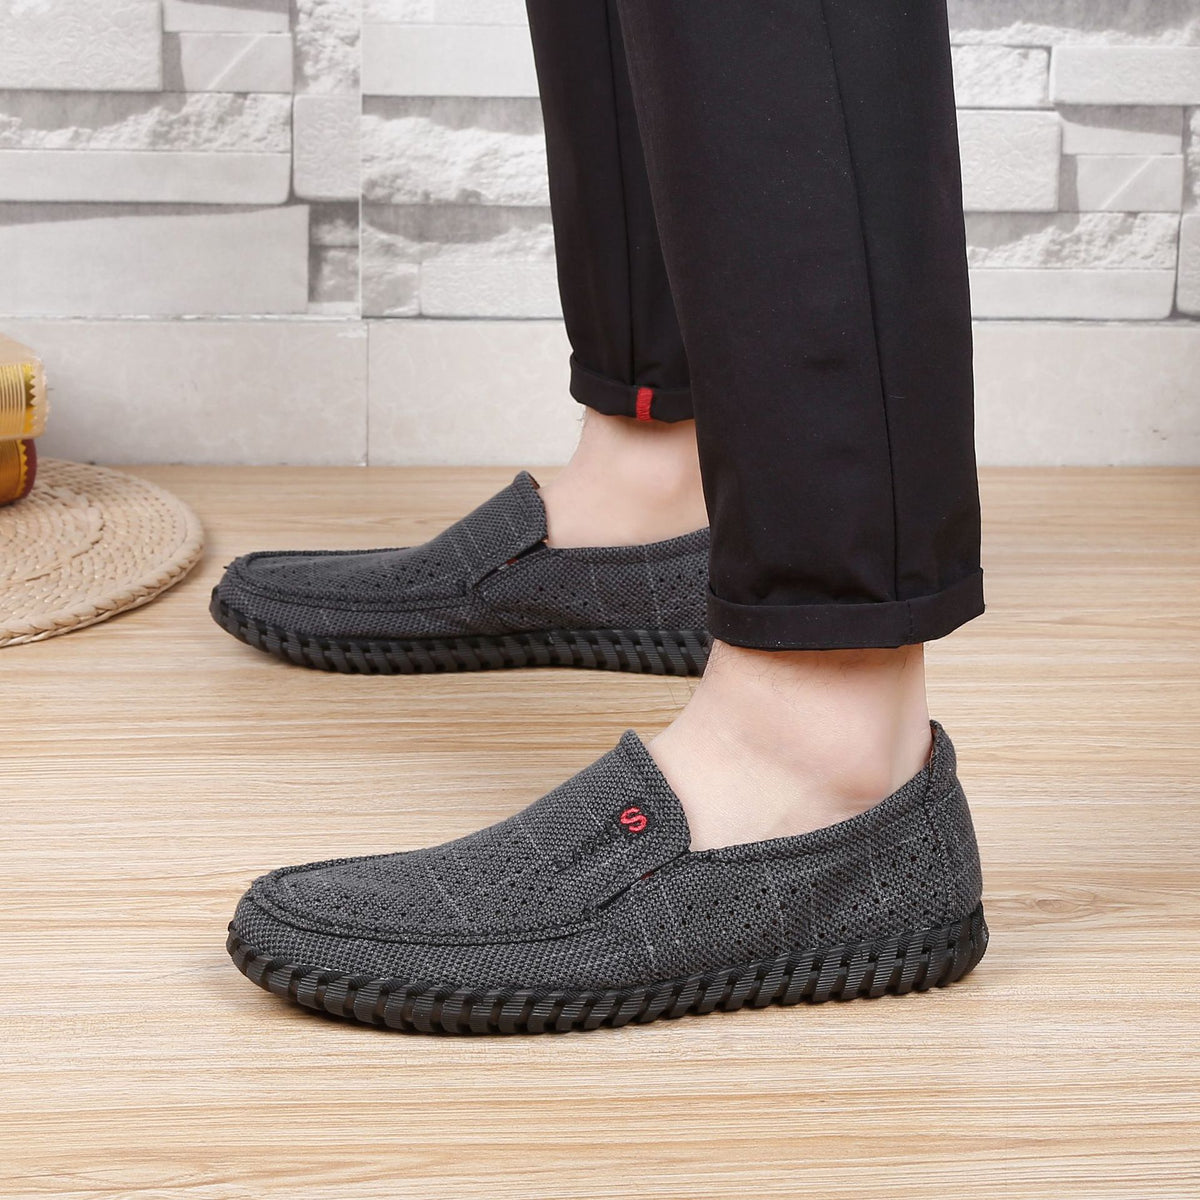 Men's Cloth Mesh Summer Breathable Beef Canvas Shoes